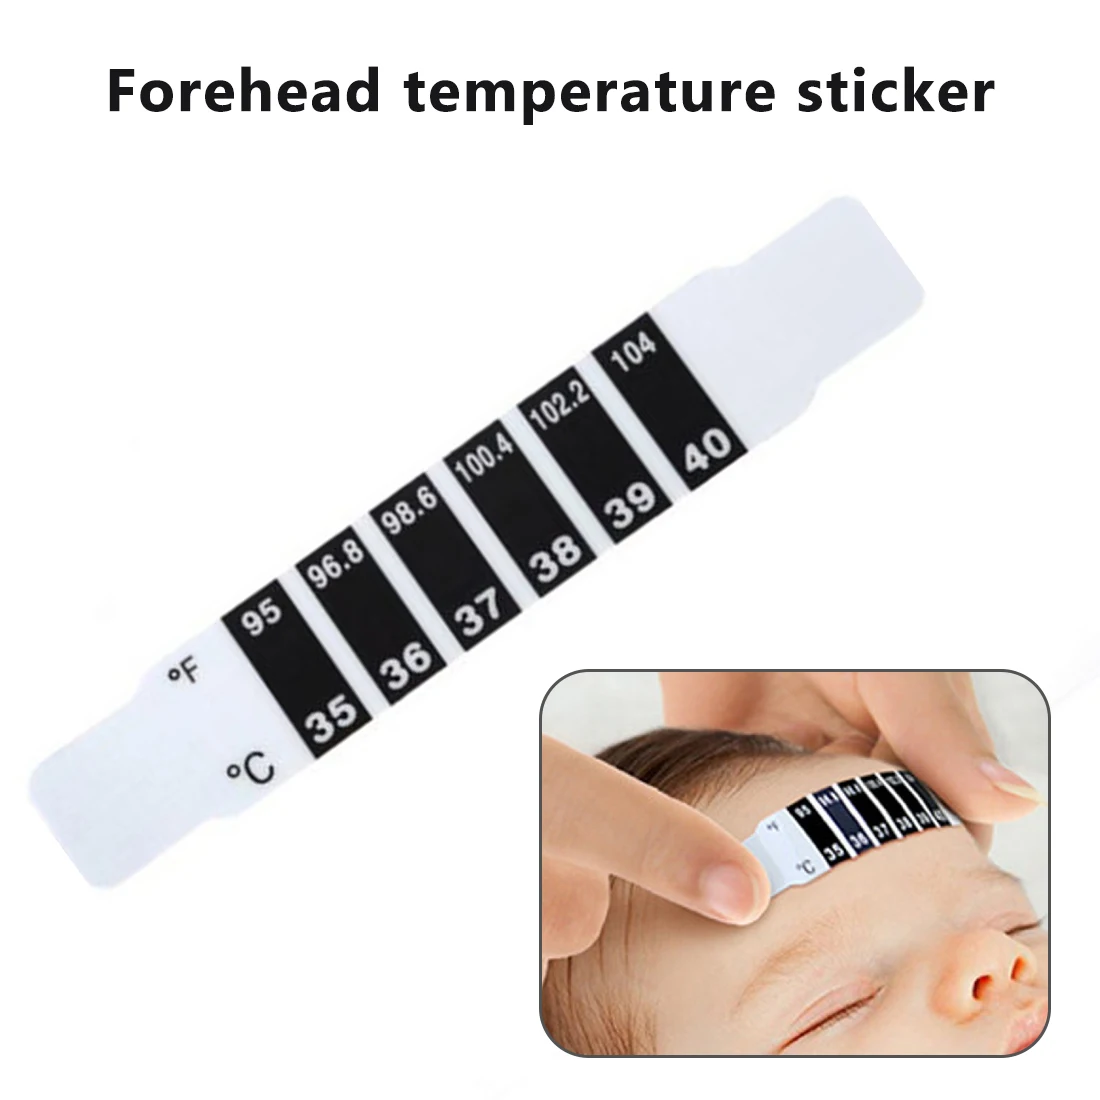 

Safe Non-Toxic 10 Pcs/lot Forehead Head Strip Thermometer Fever Body Baby Child Kid Adult Check Test Temperature Monitoring